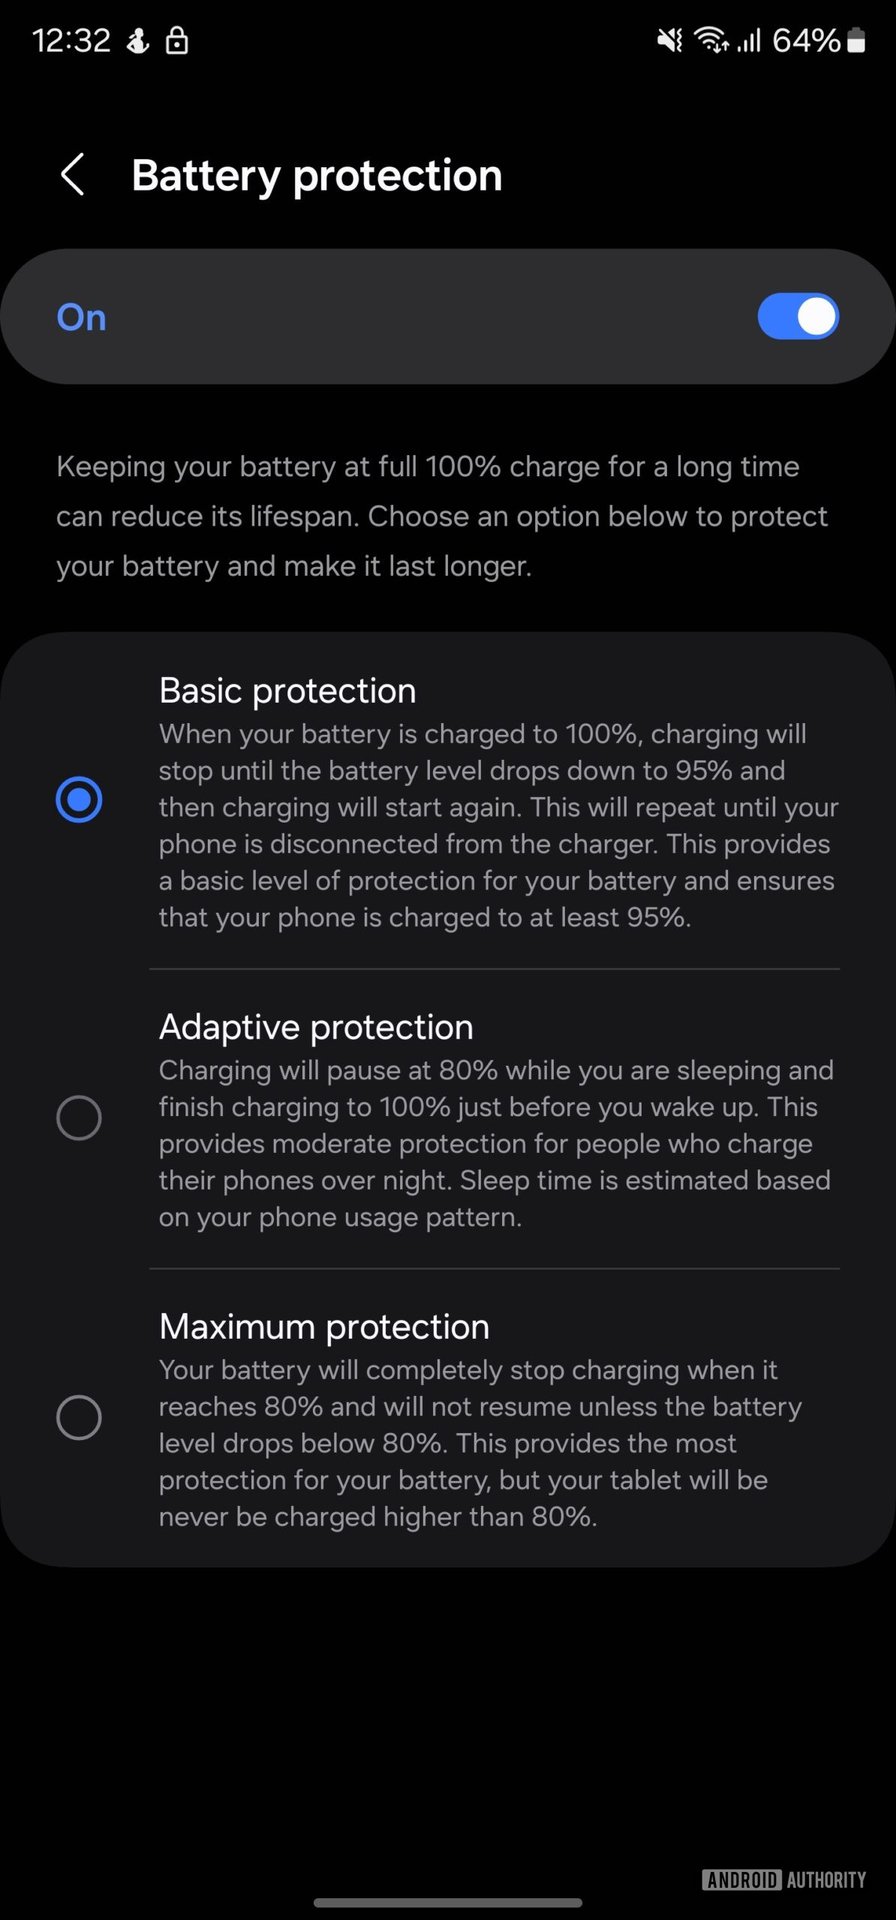 Samsung One UI 6 1 advanced battery protection